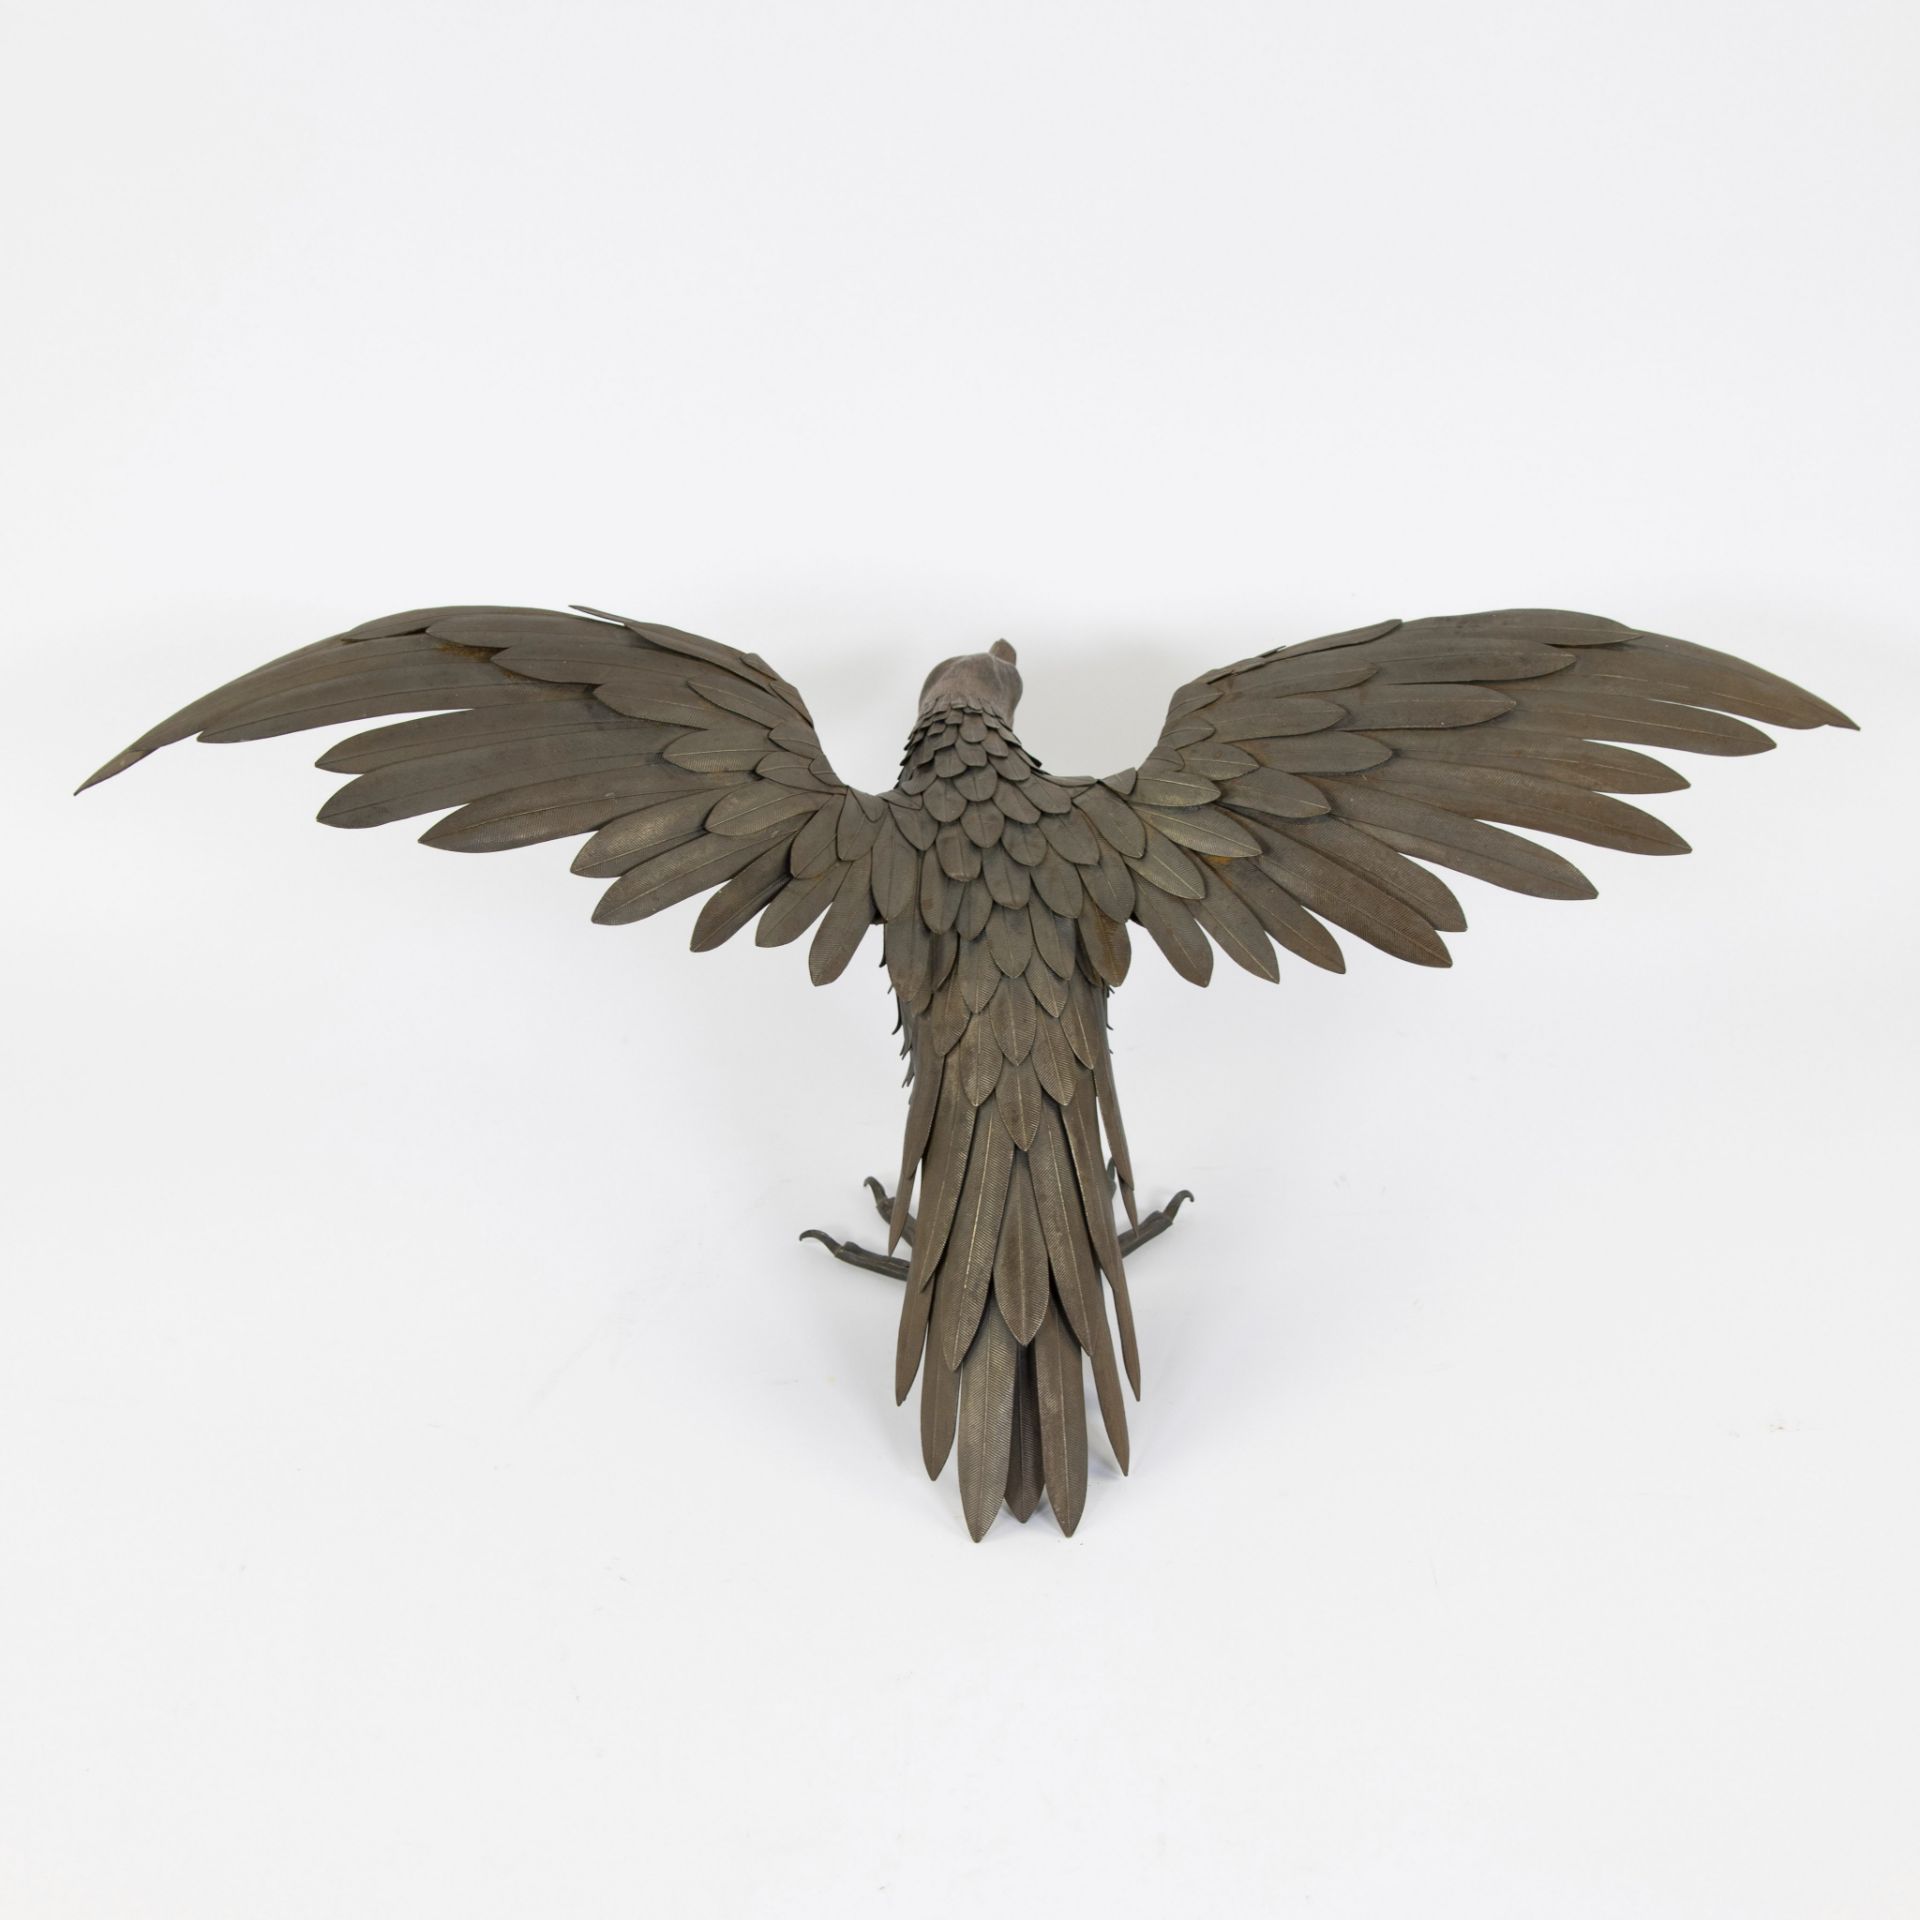 Exceptionally fine wrought iron eagle - Image 3 of 4